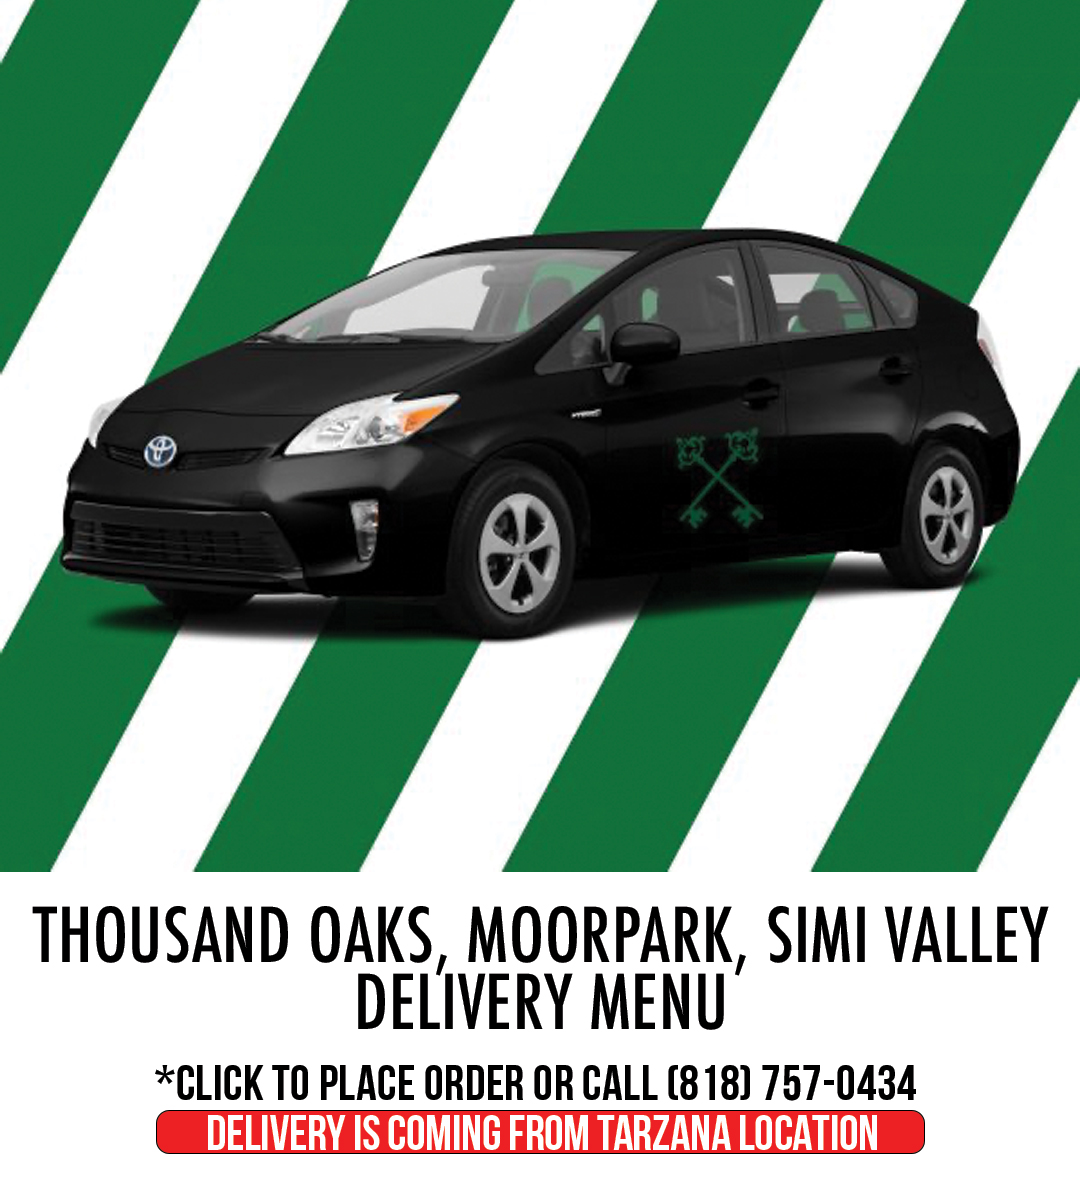 TO-Moorpark-Simi-Delivery-Pickup-Menu